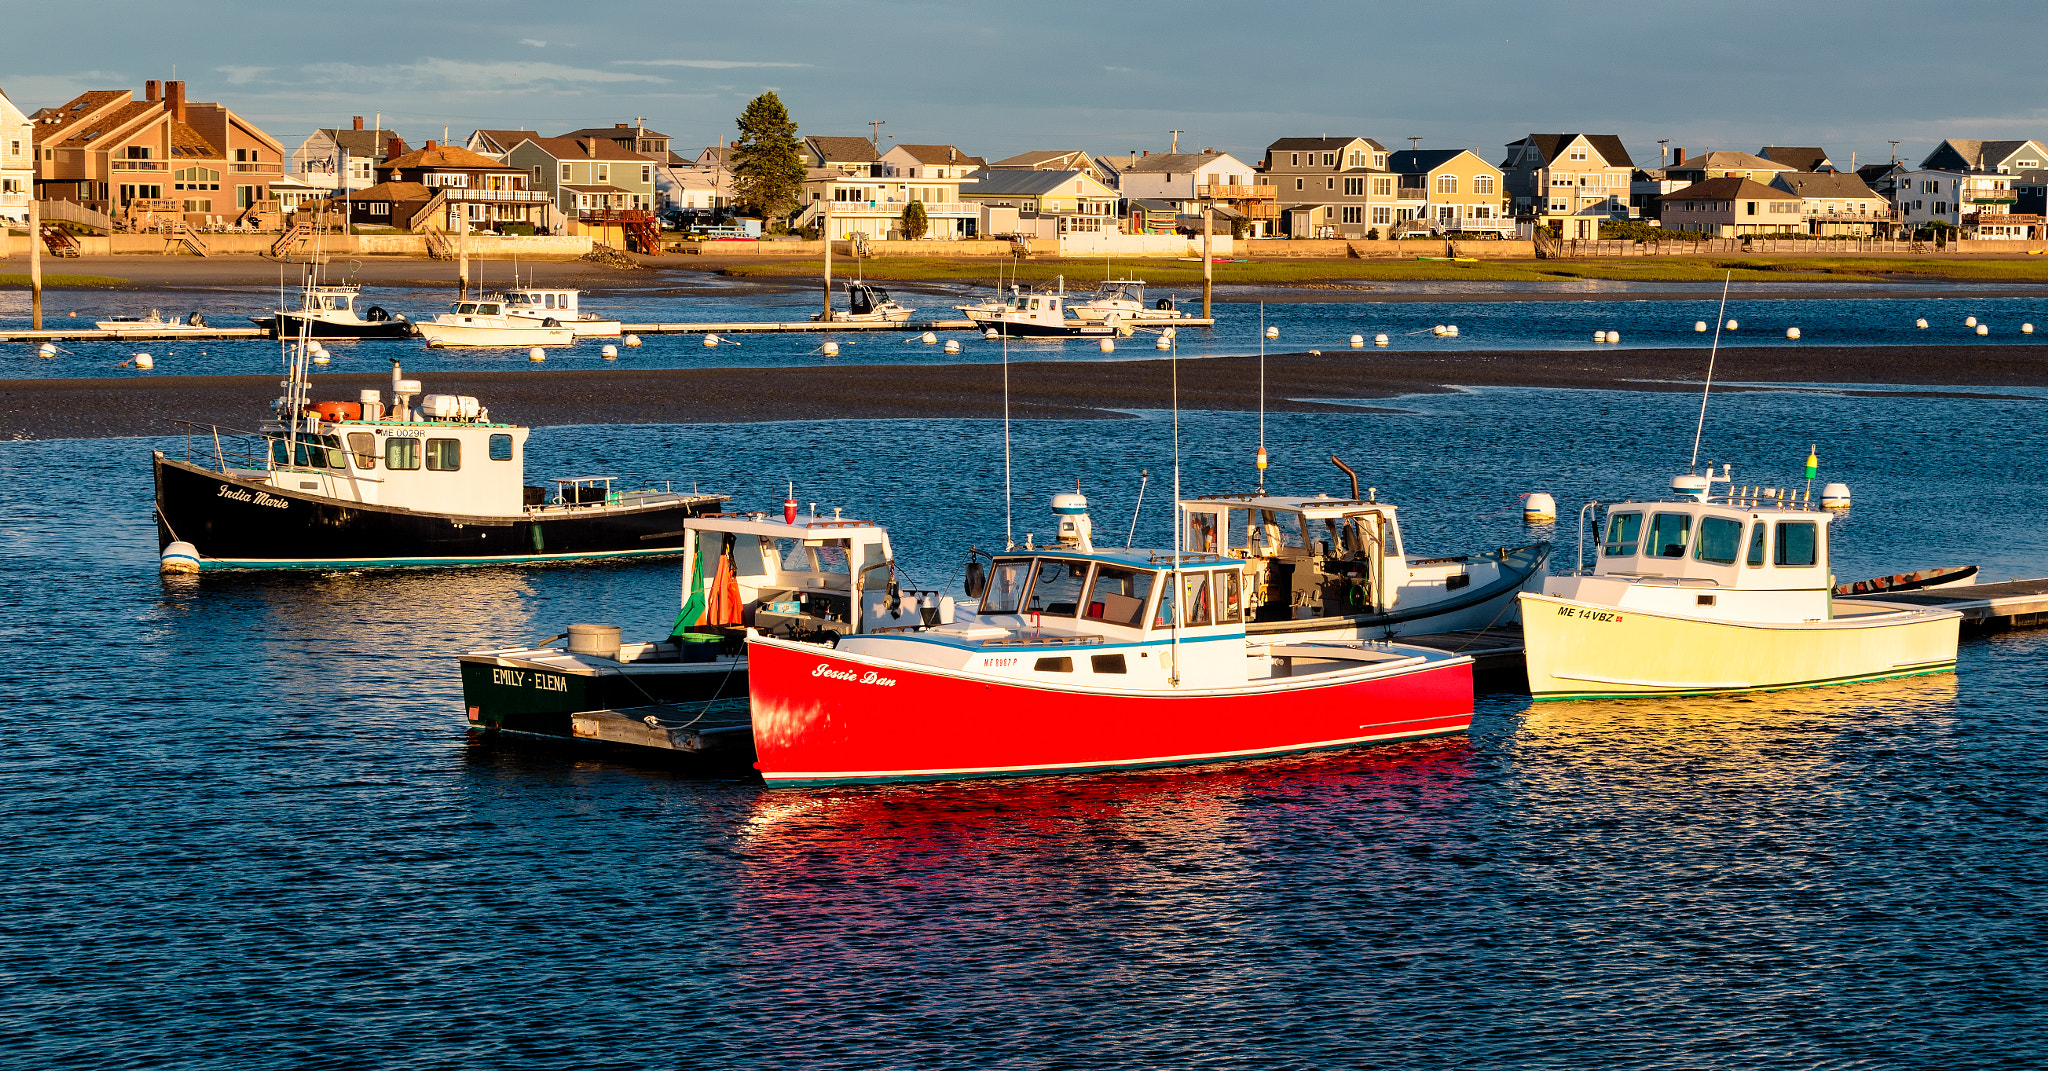 Canon EOS 7D Mark II sample photo. The wells harbor, me lobster fleet at sunset. photography